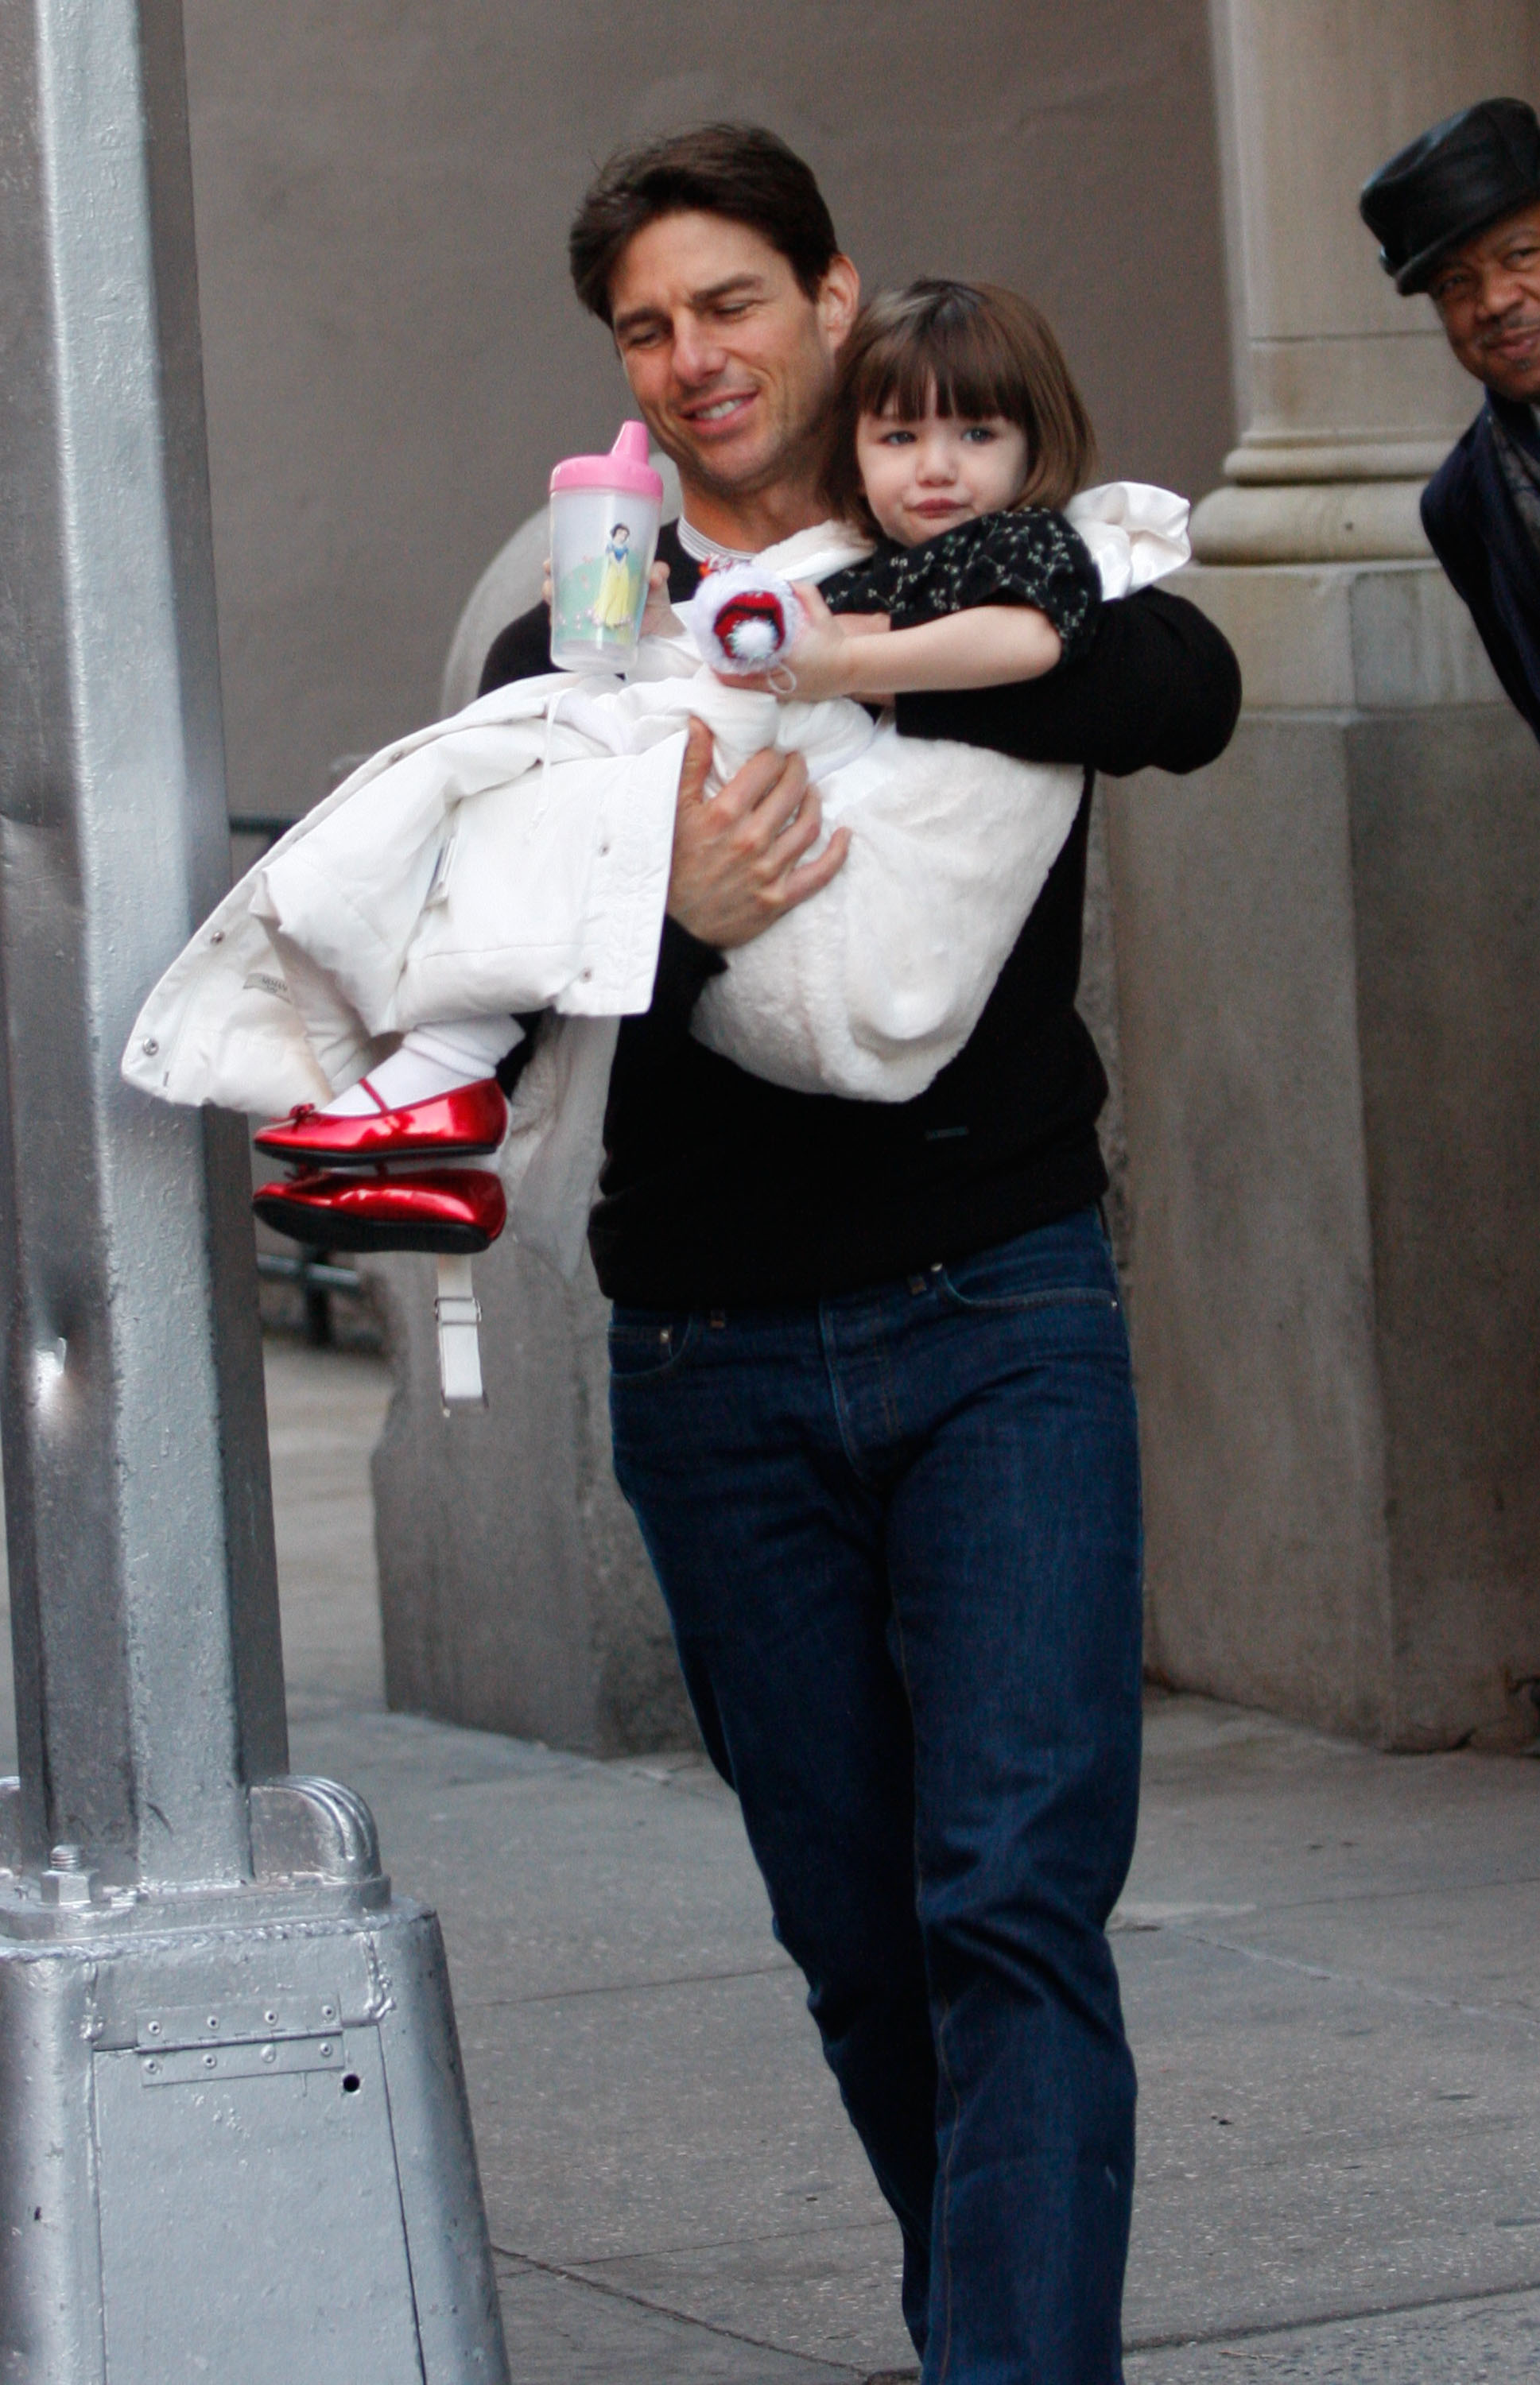 Tom Cruise and Suri Cruise as seen on the streets of Manhattan in New York City, on December 3, 2008. | Source: Getty Images